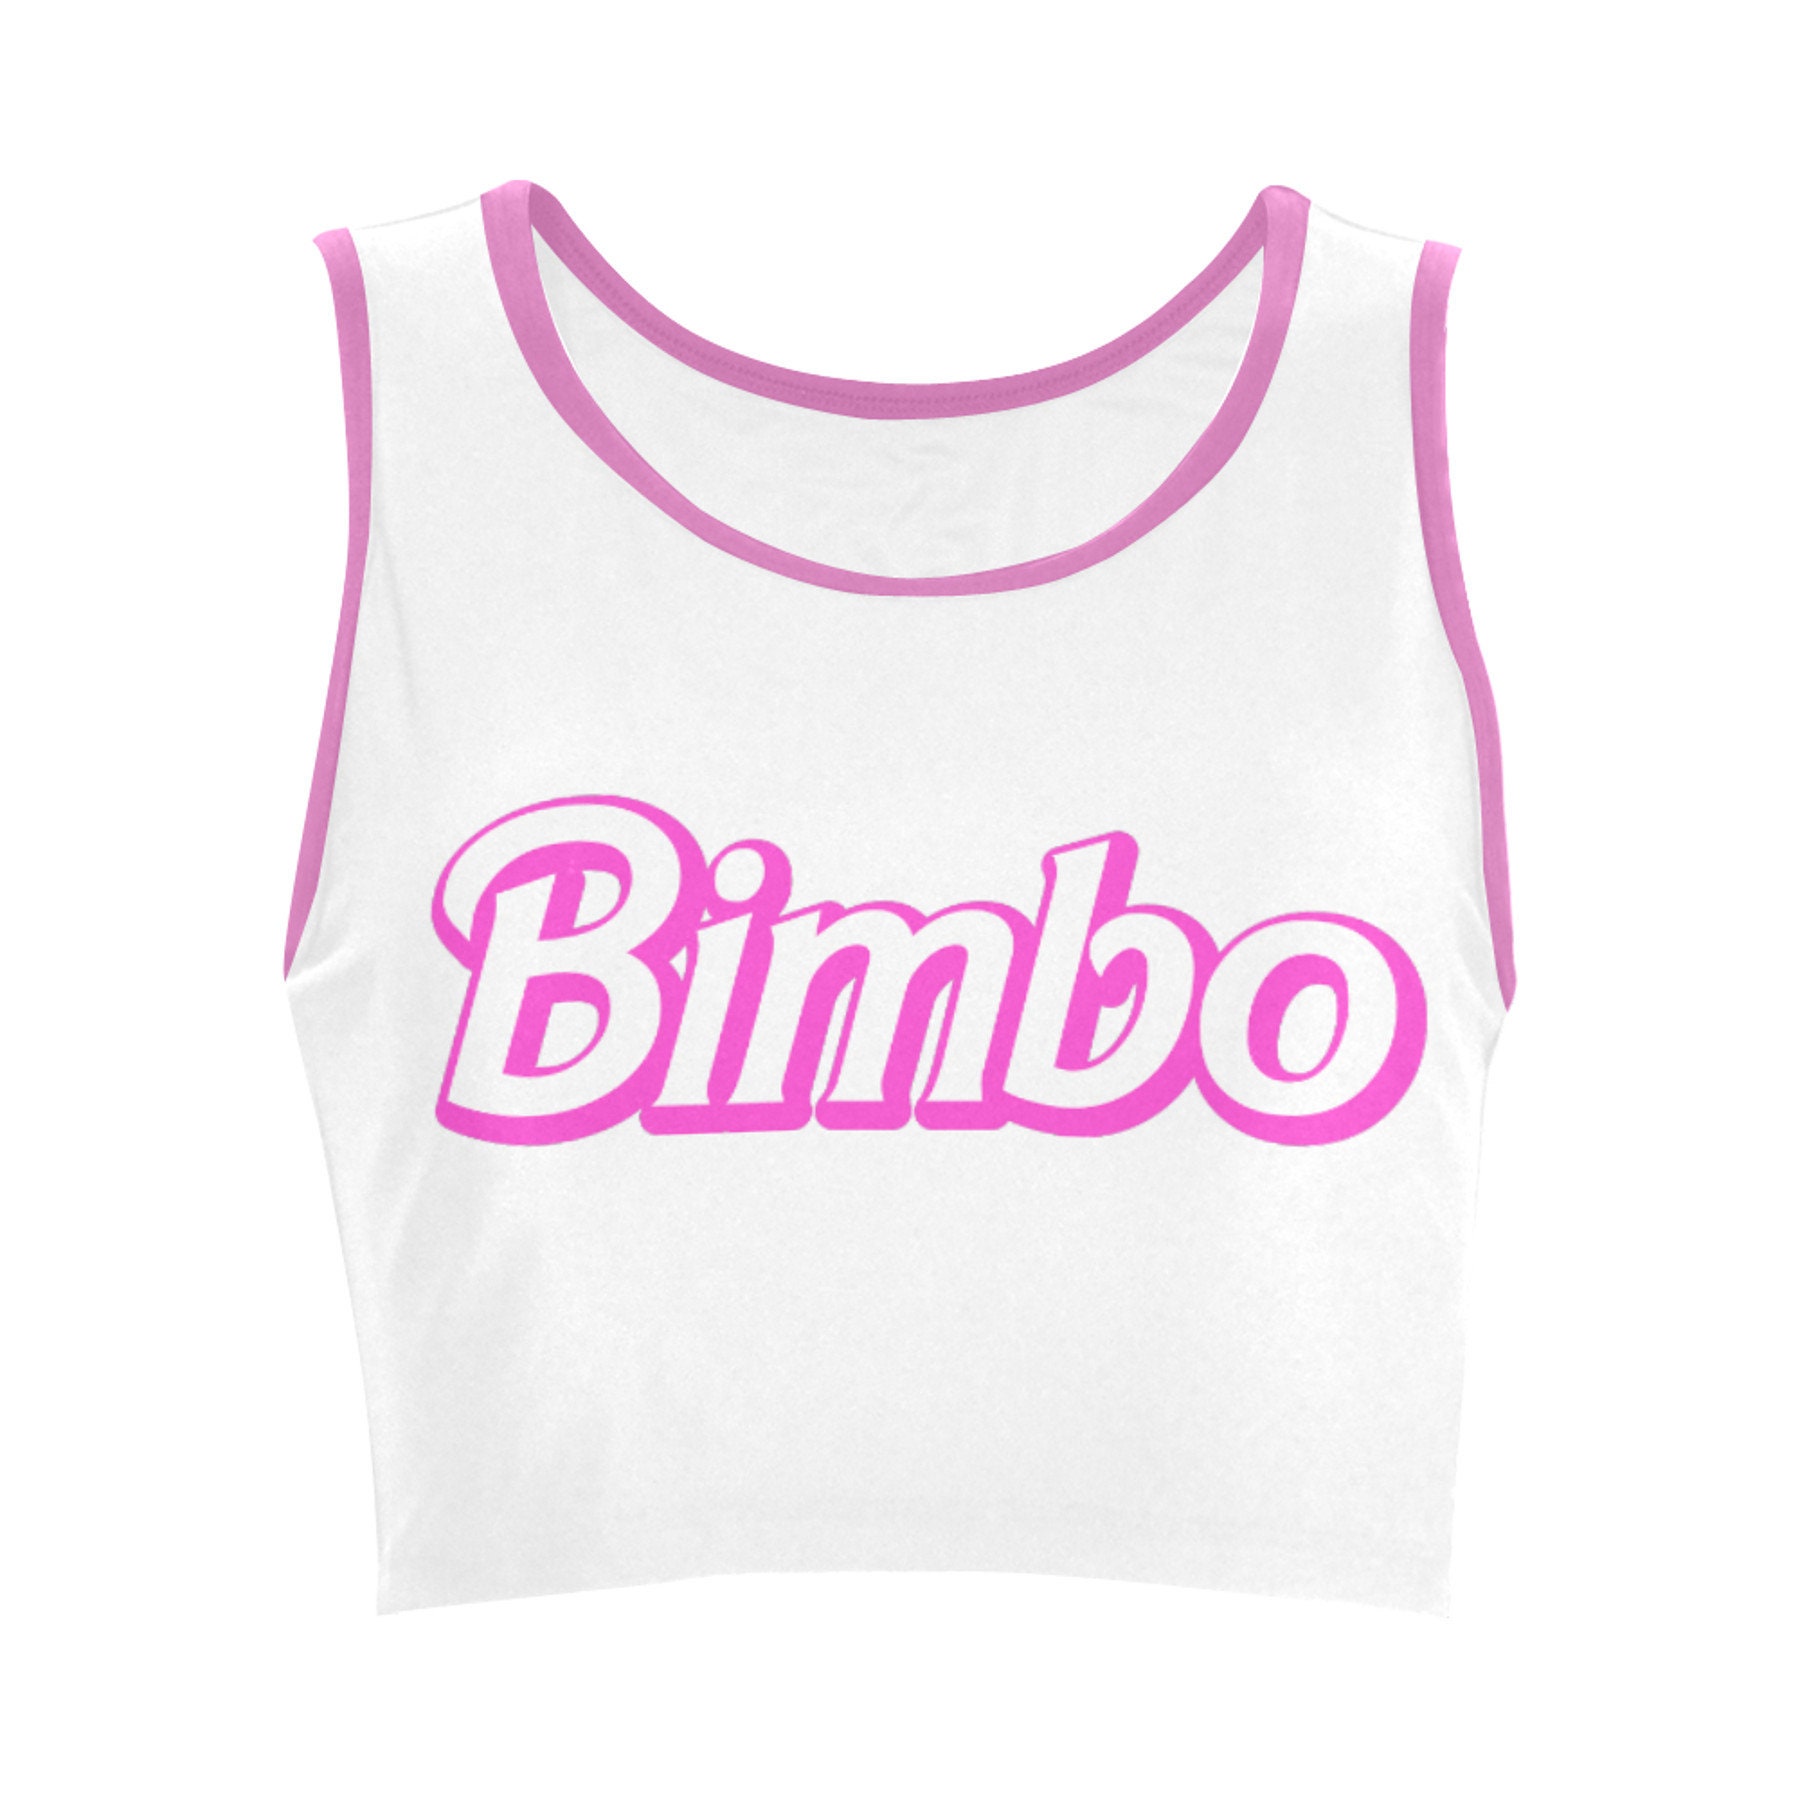 Bimbos in lingerie tumblr Bimbo Ddlg Clothing Abdl Clothing Ddlg Crop Top Adult Etsy